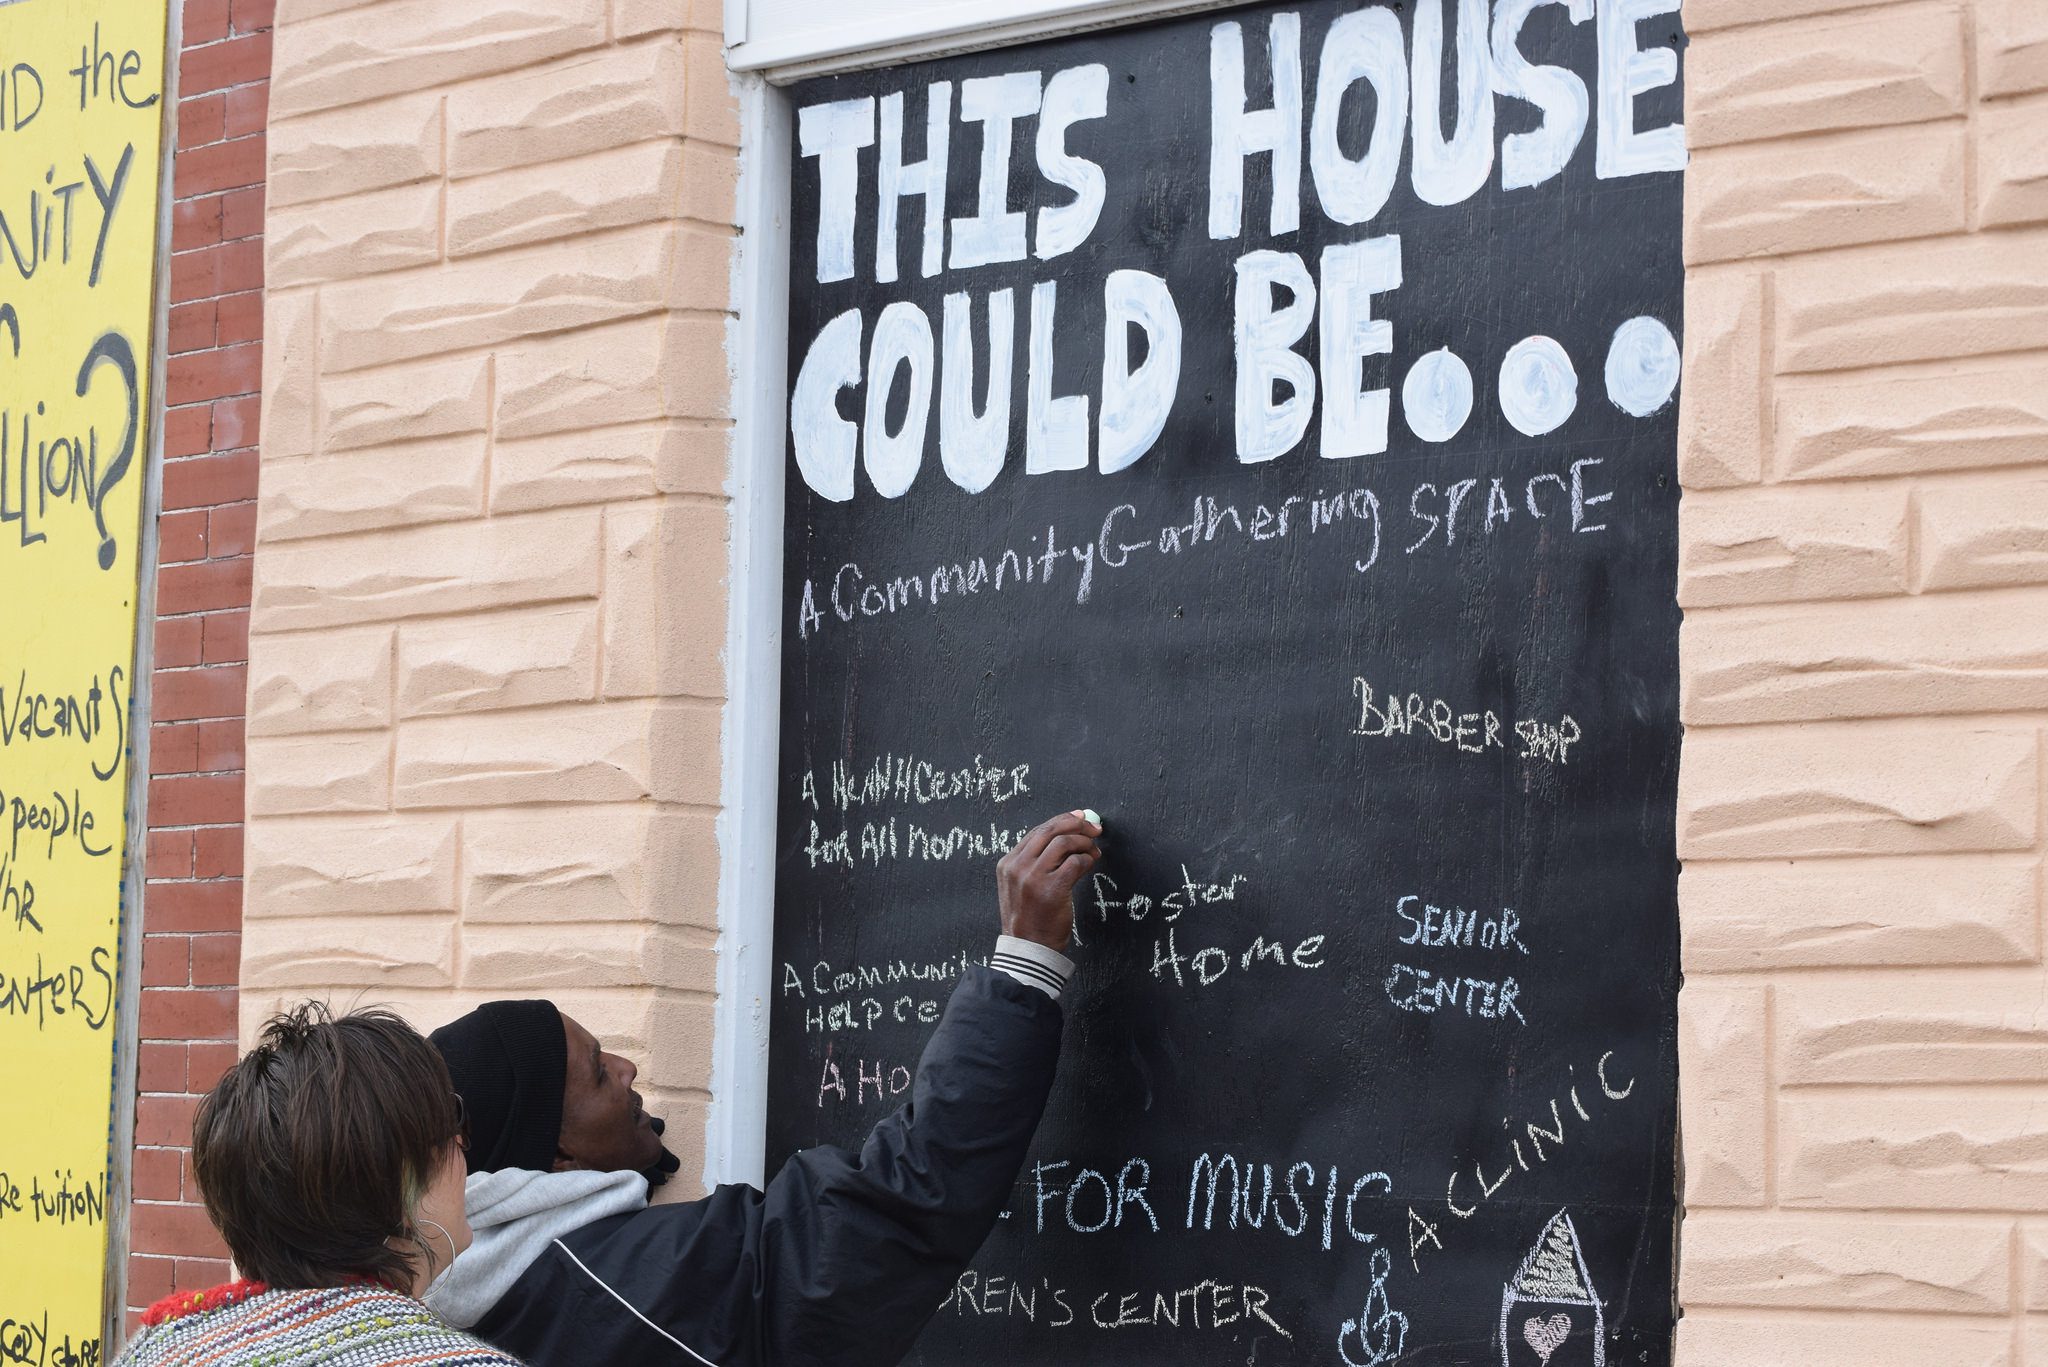 A man and a woman stand in front of a chalkboard sign that reads "This House Could Be ..."The man is writing on the board, as many others have done. Some of the suggestions for what the house could be include a community gathering space and a senior center.